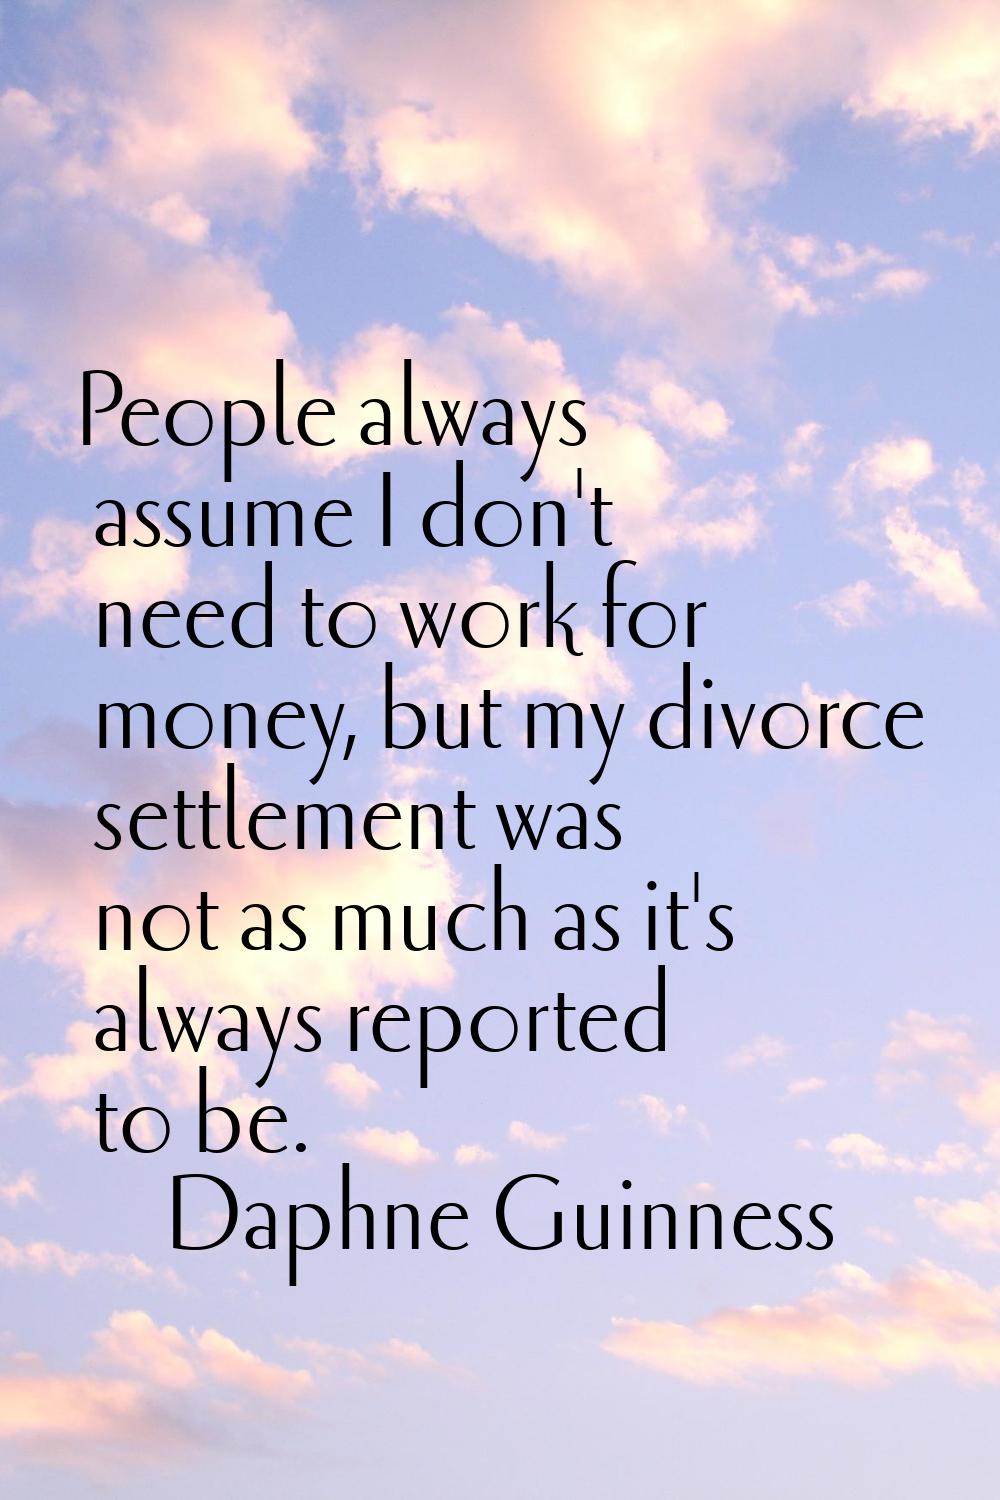 People always assume I don't need to work for money, but my divorce settlement was not as much as i